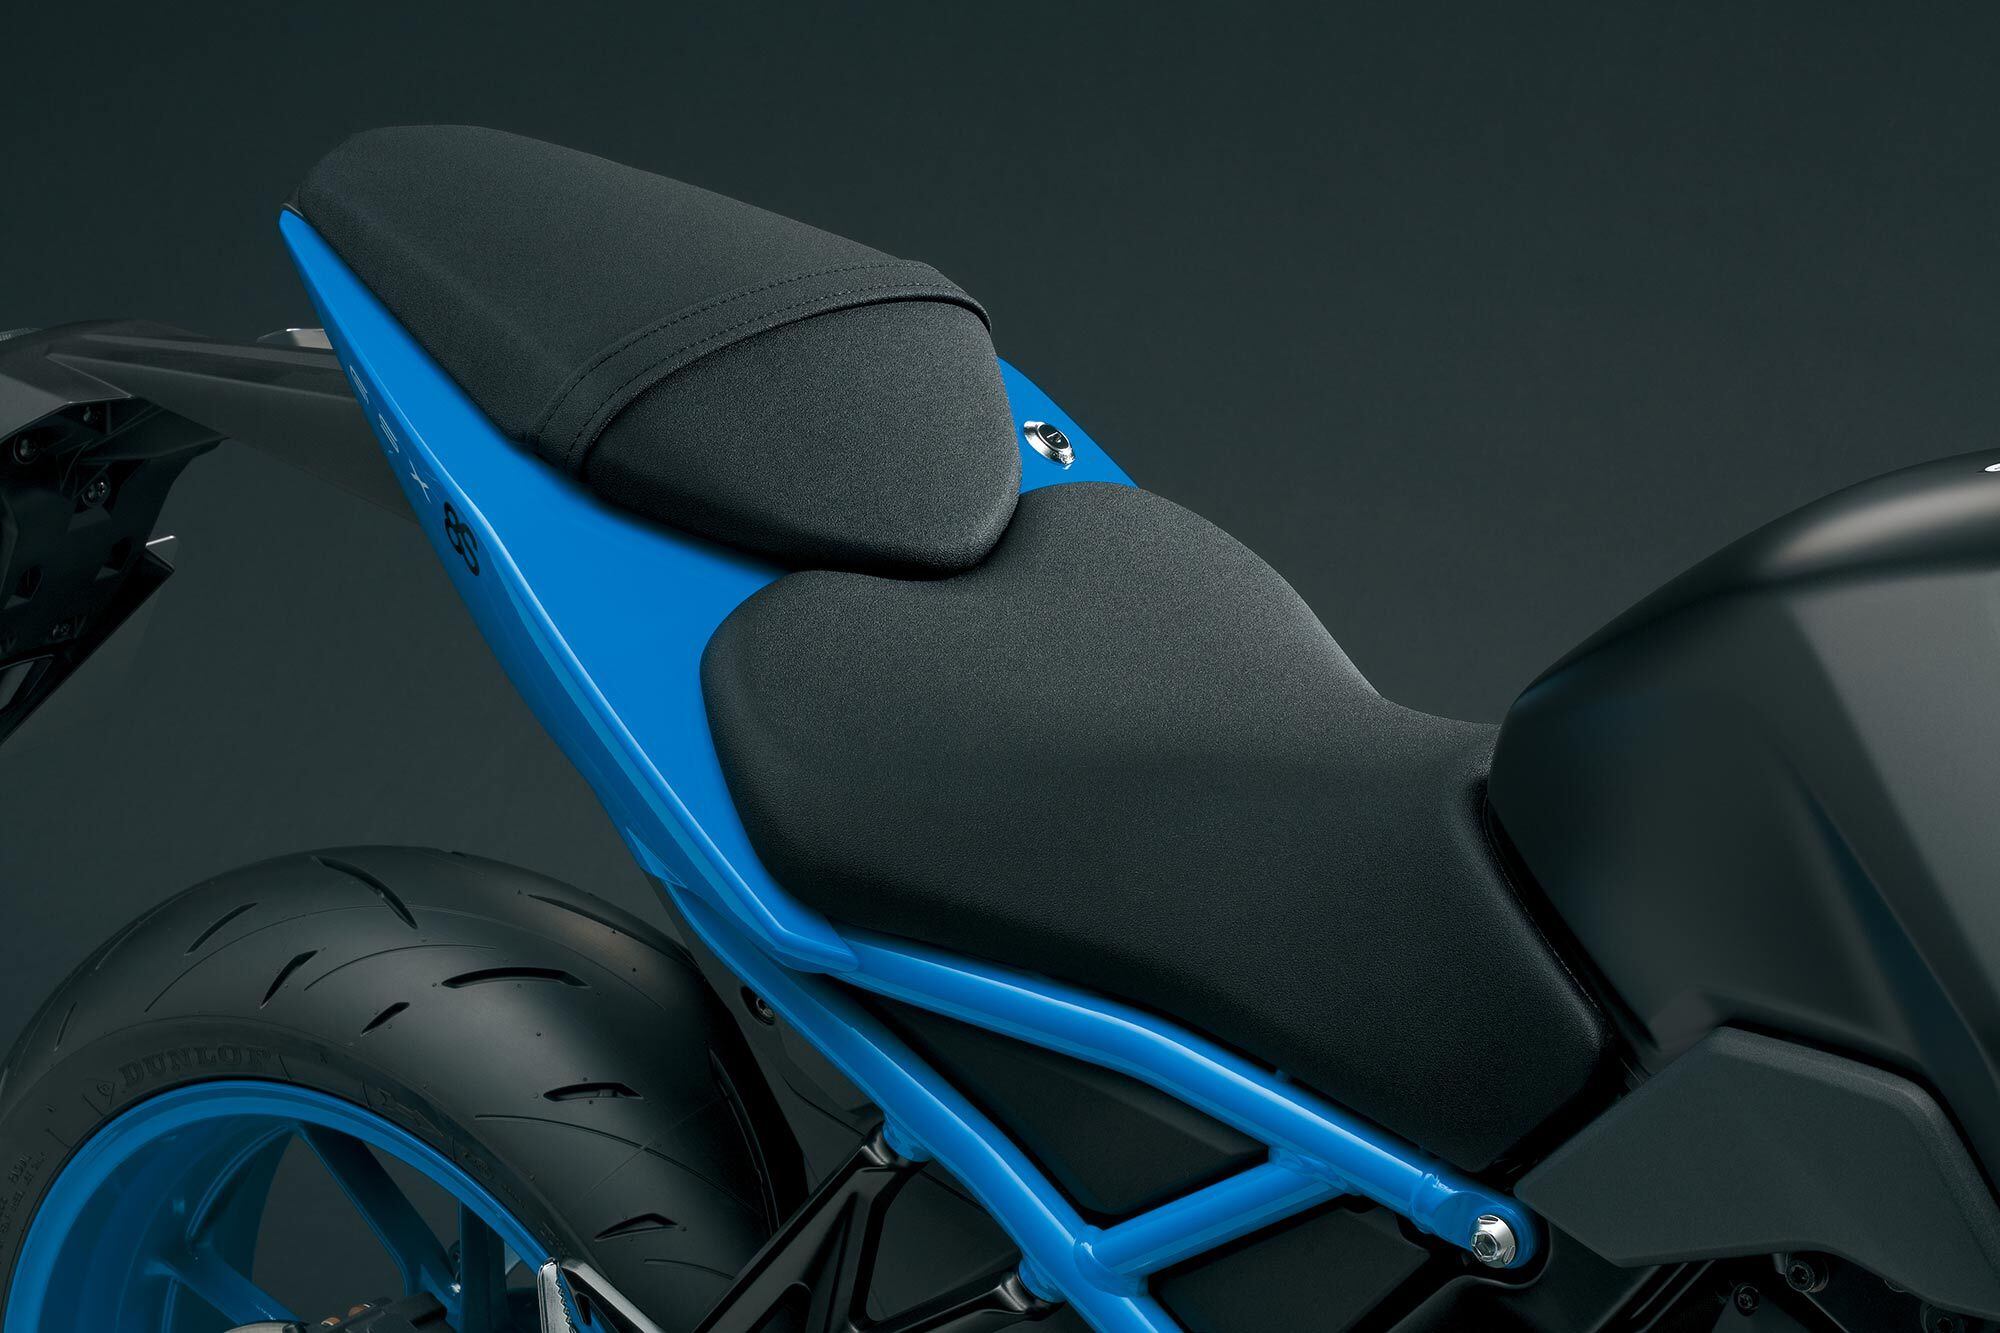 The cockpit provides an upright riding position and comfortable seat for rider and passenger.